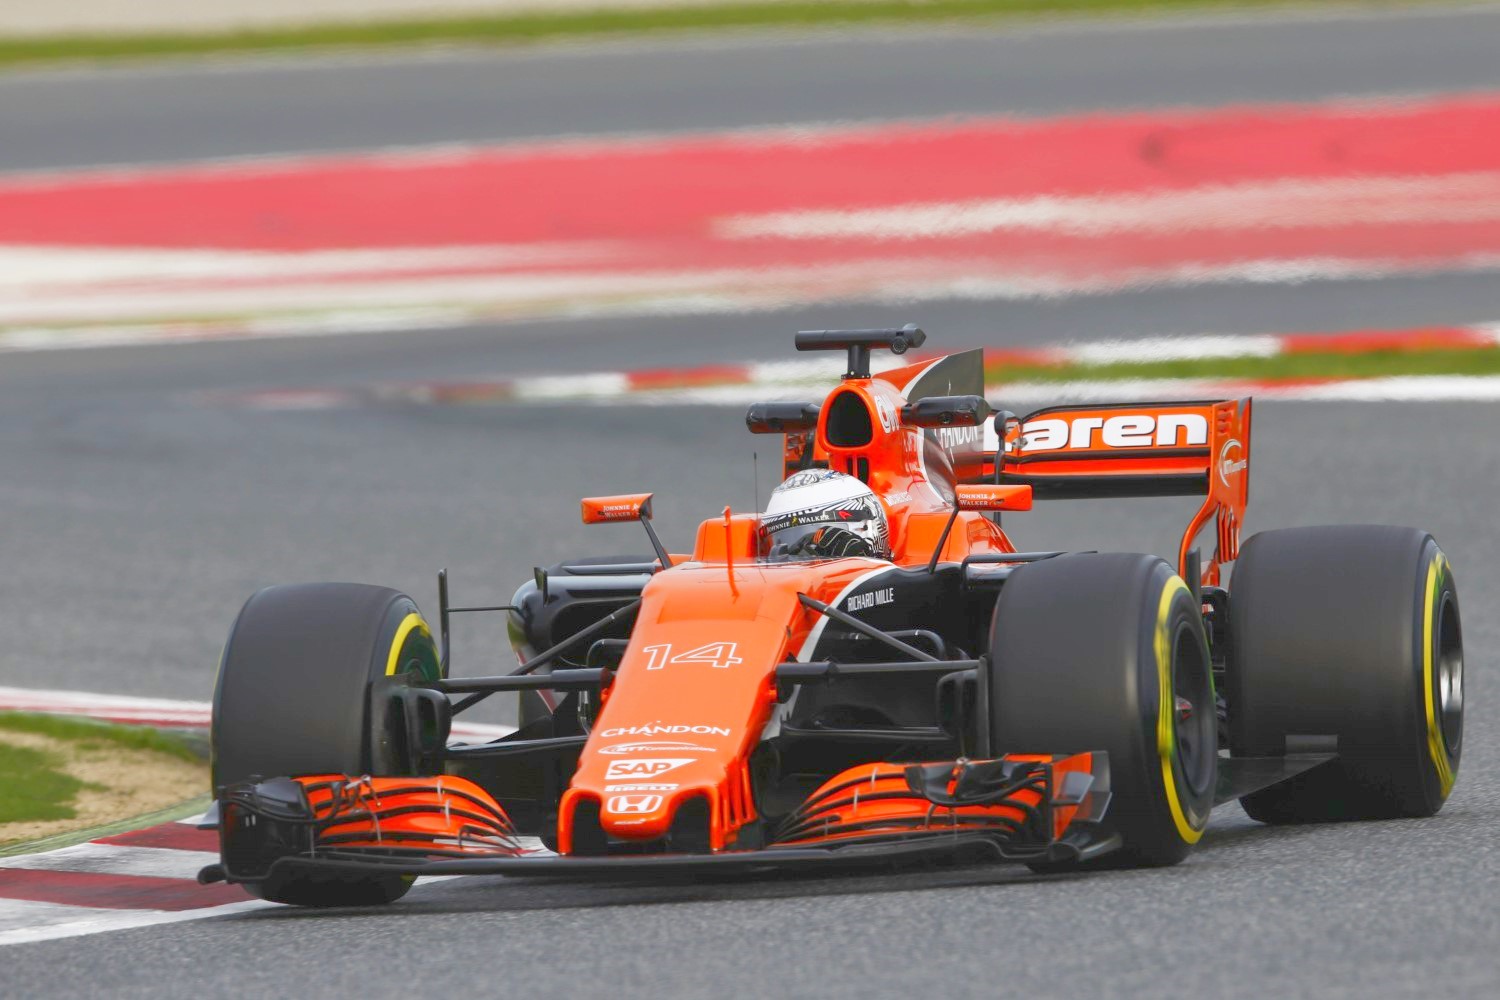 McLaren and Honda stuck with each other